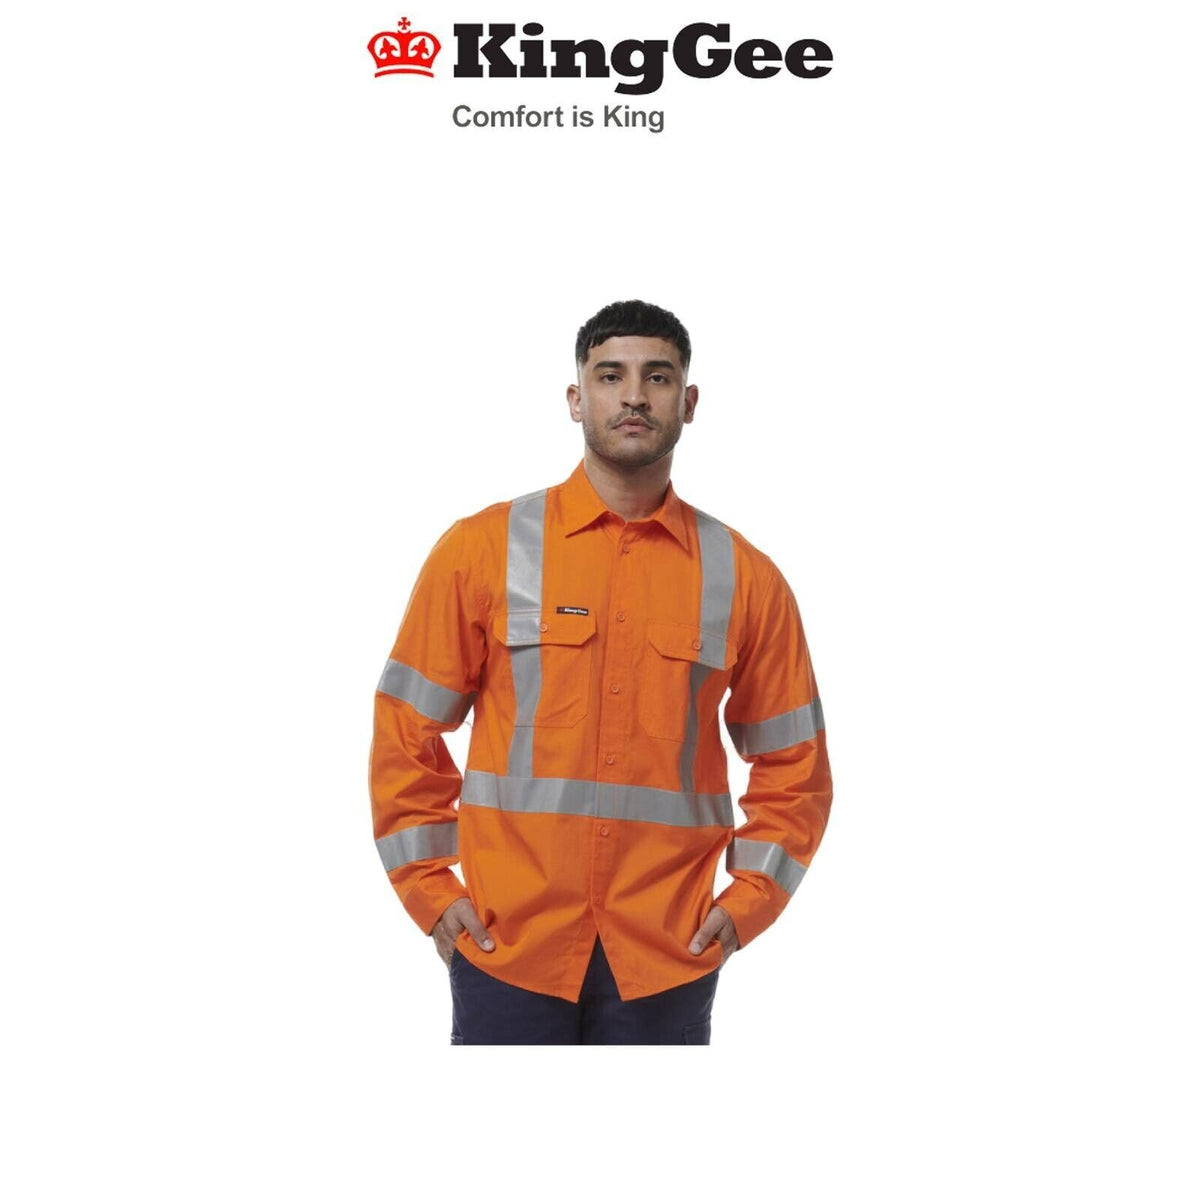 KingGee Mens Workcool Lightweight Breathable NSW Comfy Rail Work Shirt K54016-Collins Clothing Co